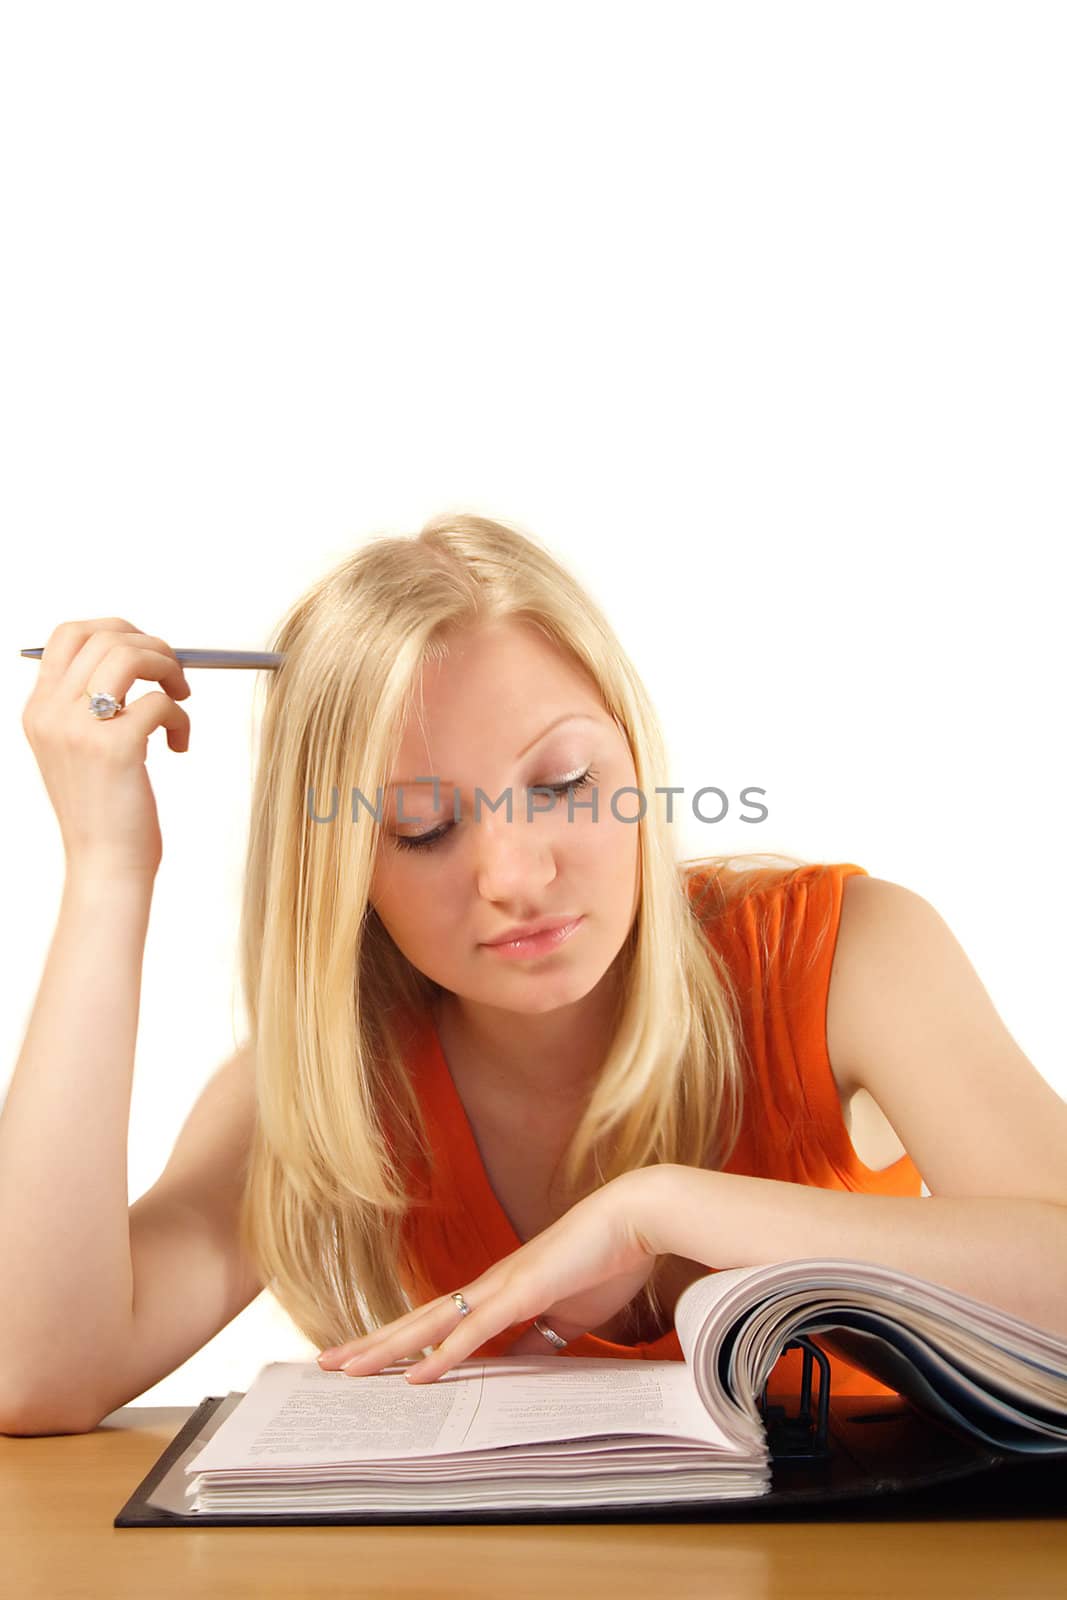 An ambitious student studying her documents. All isolated on white background.